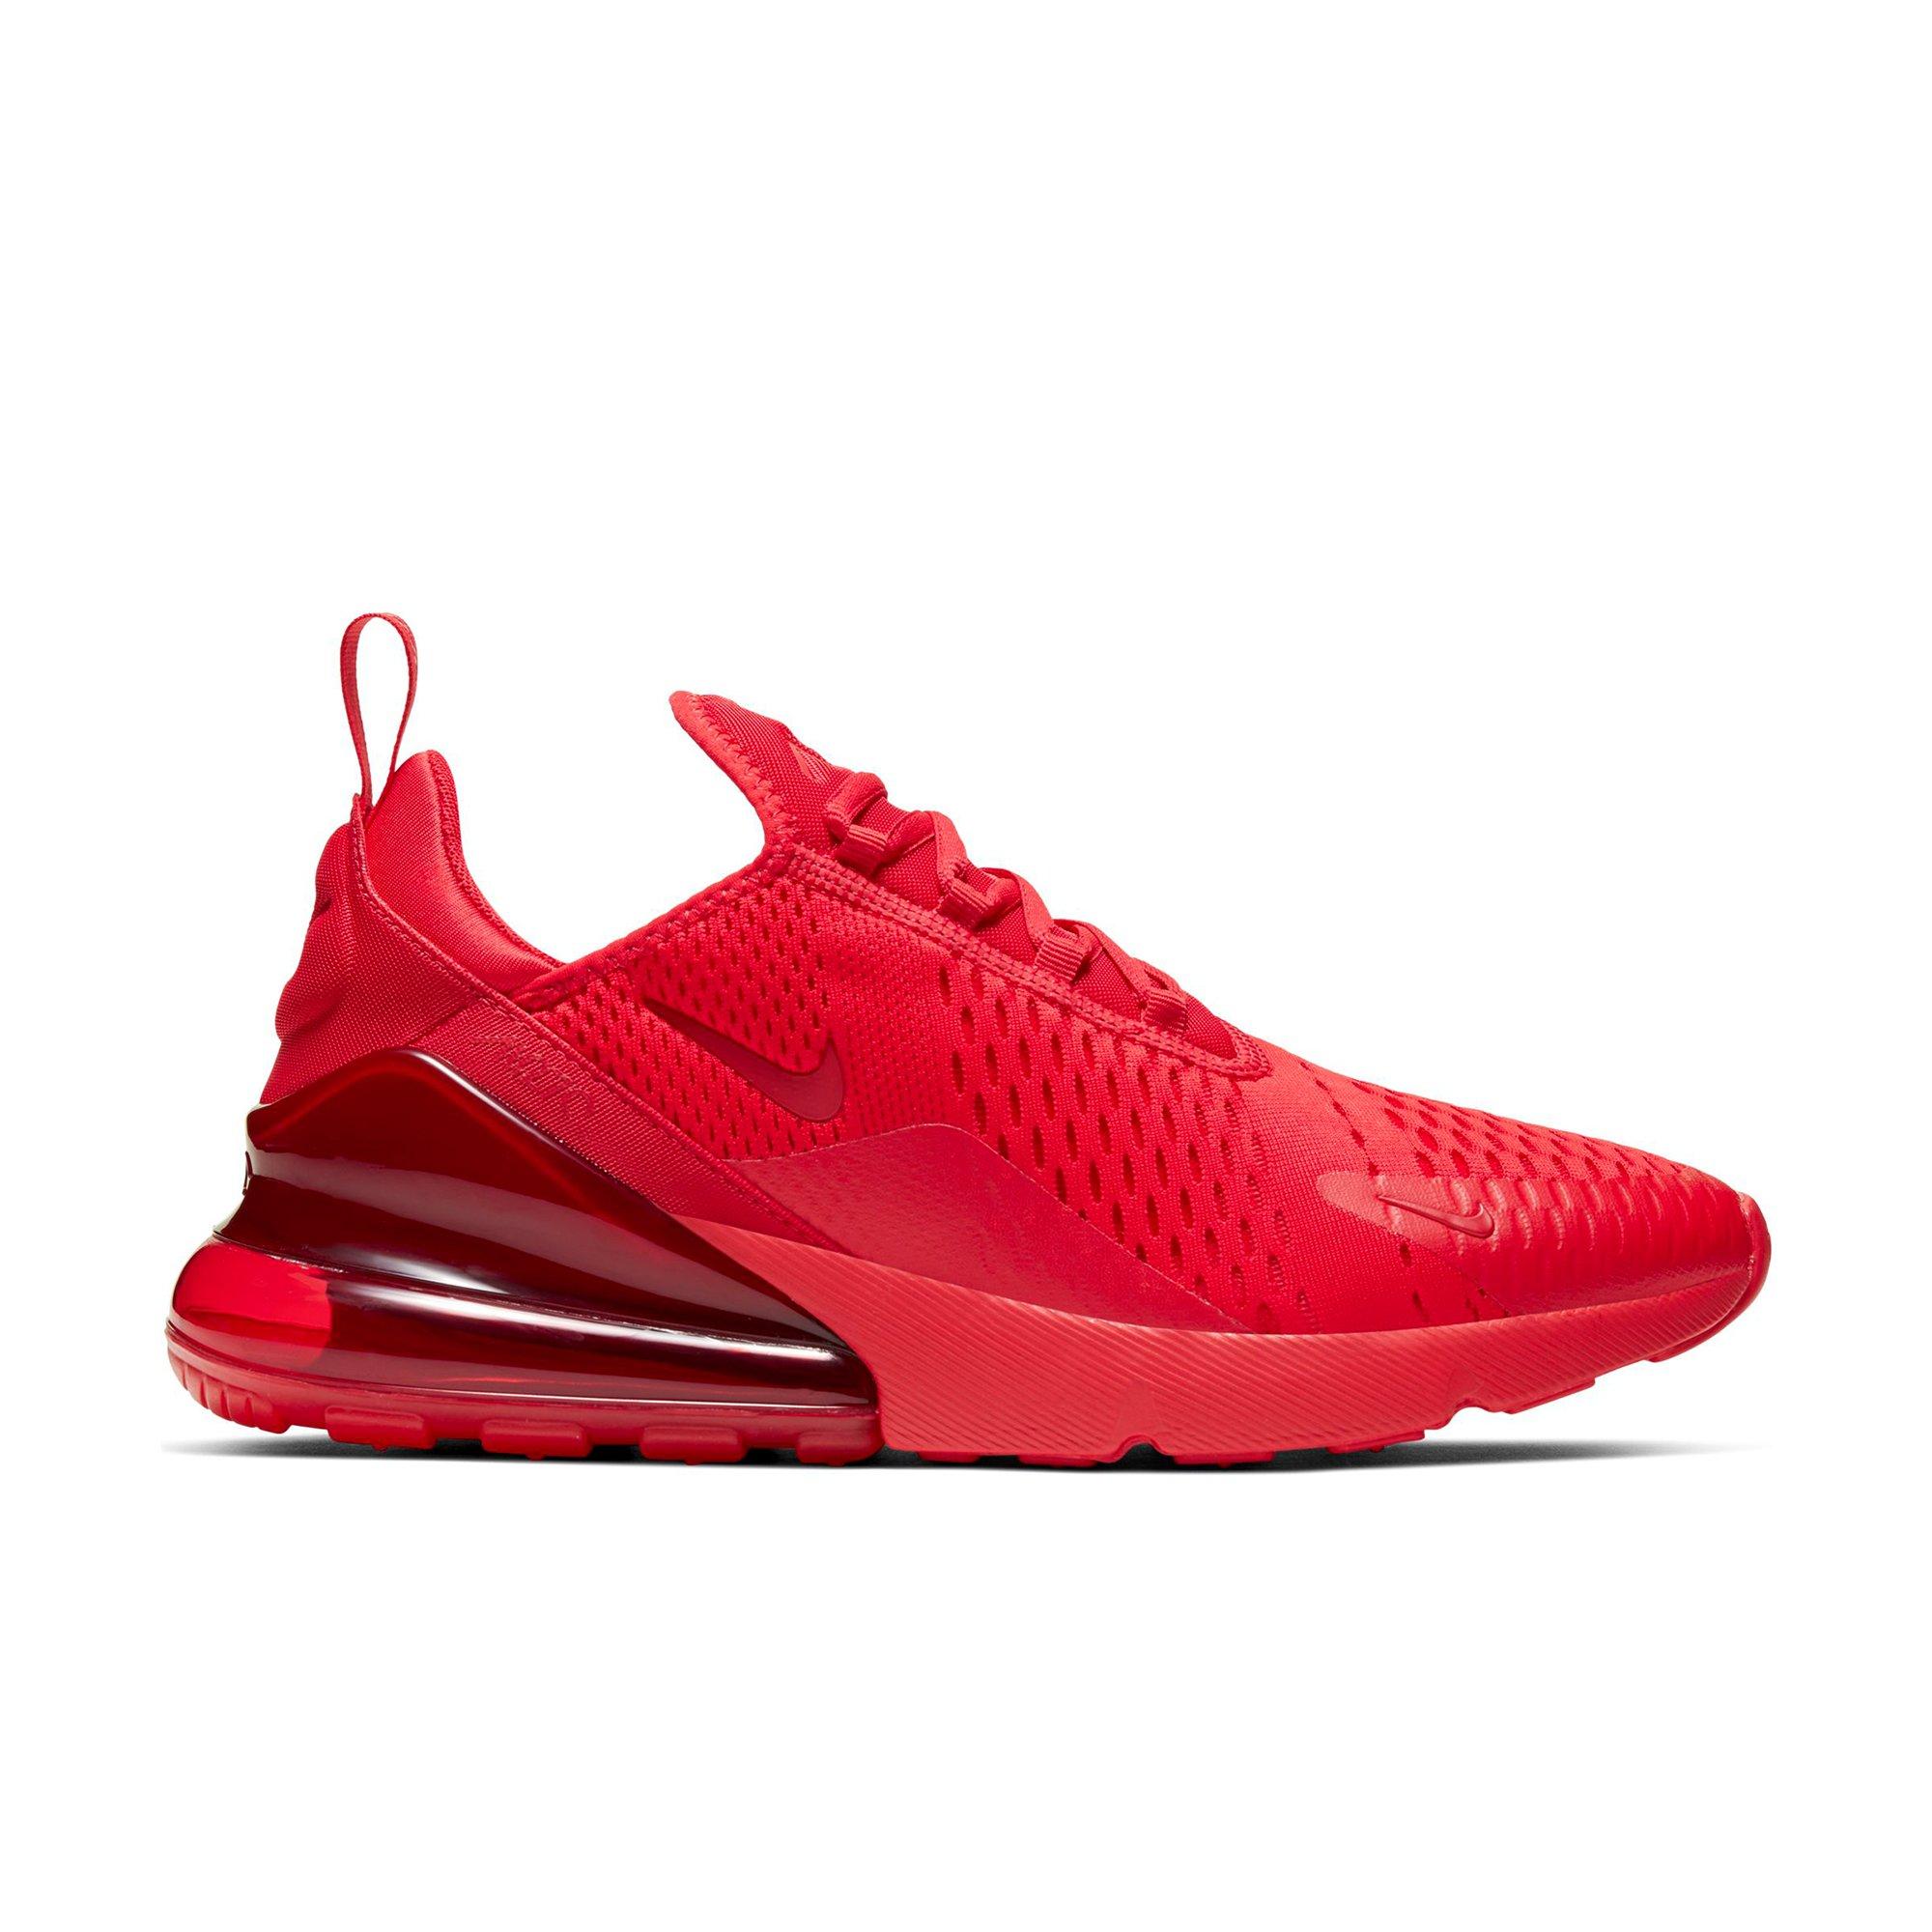 womens air max red nike shoes